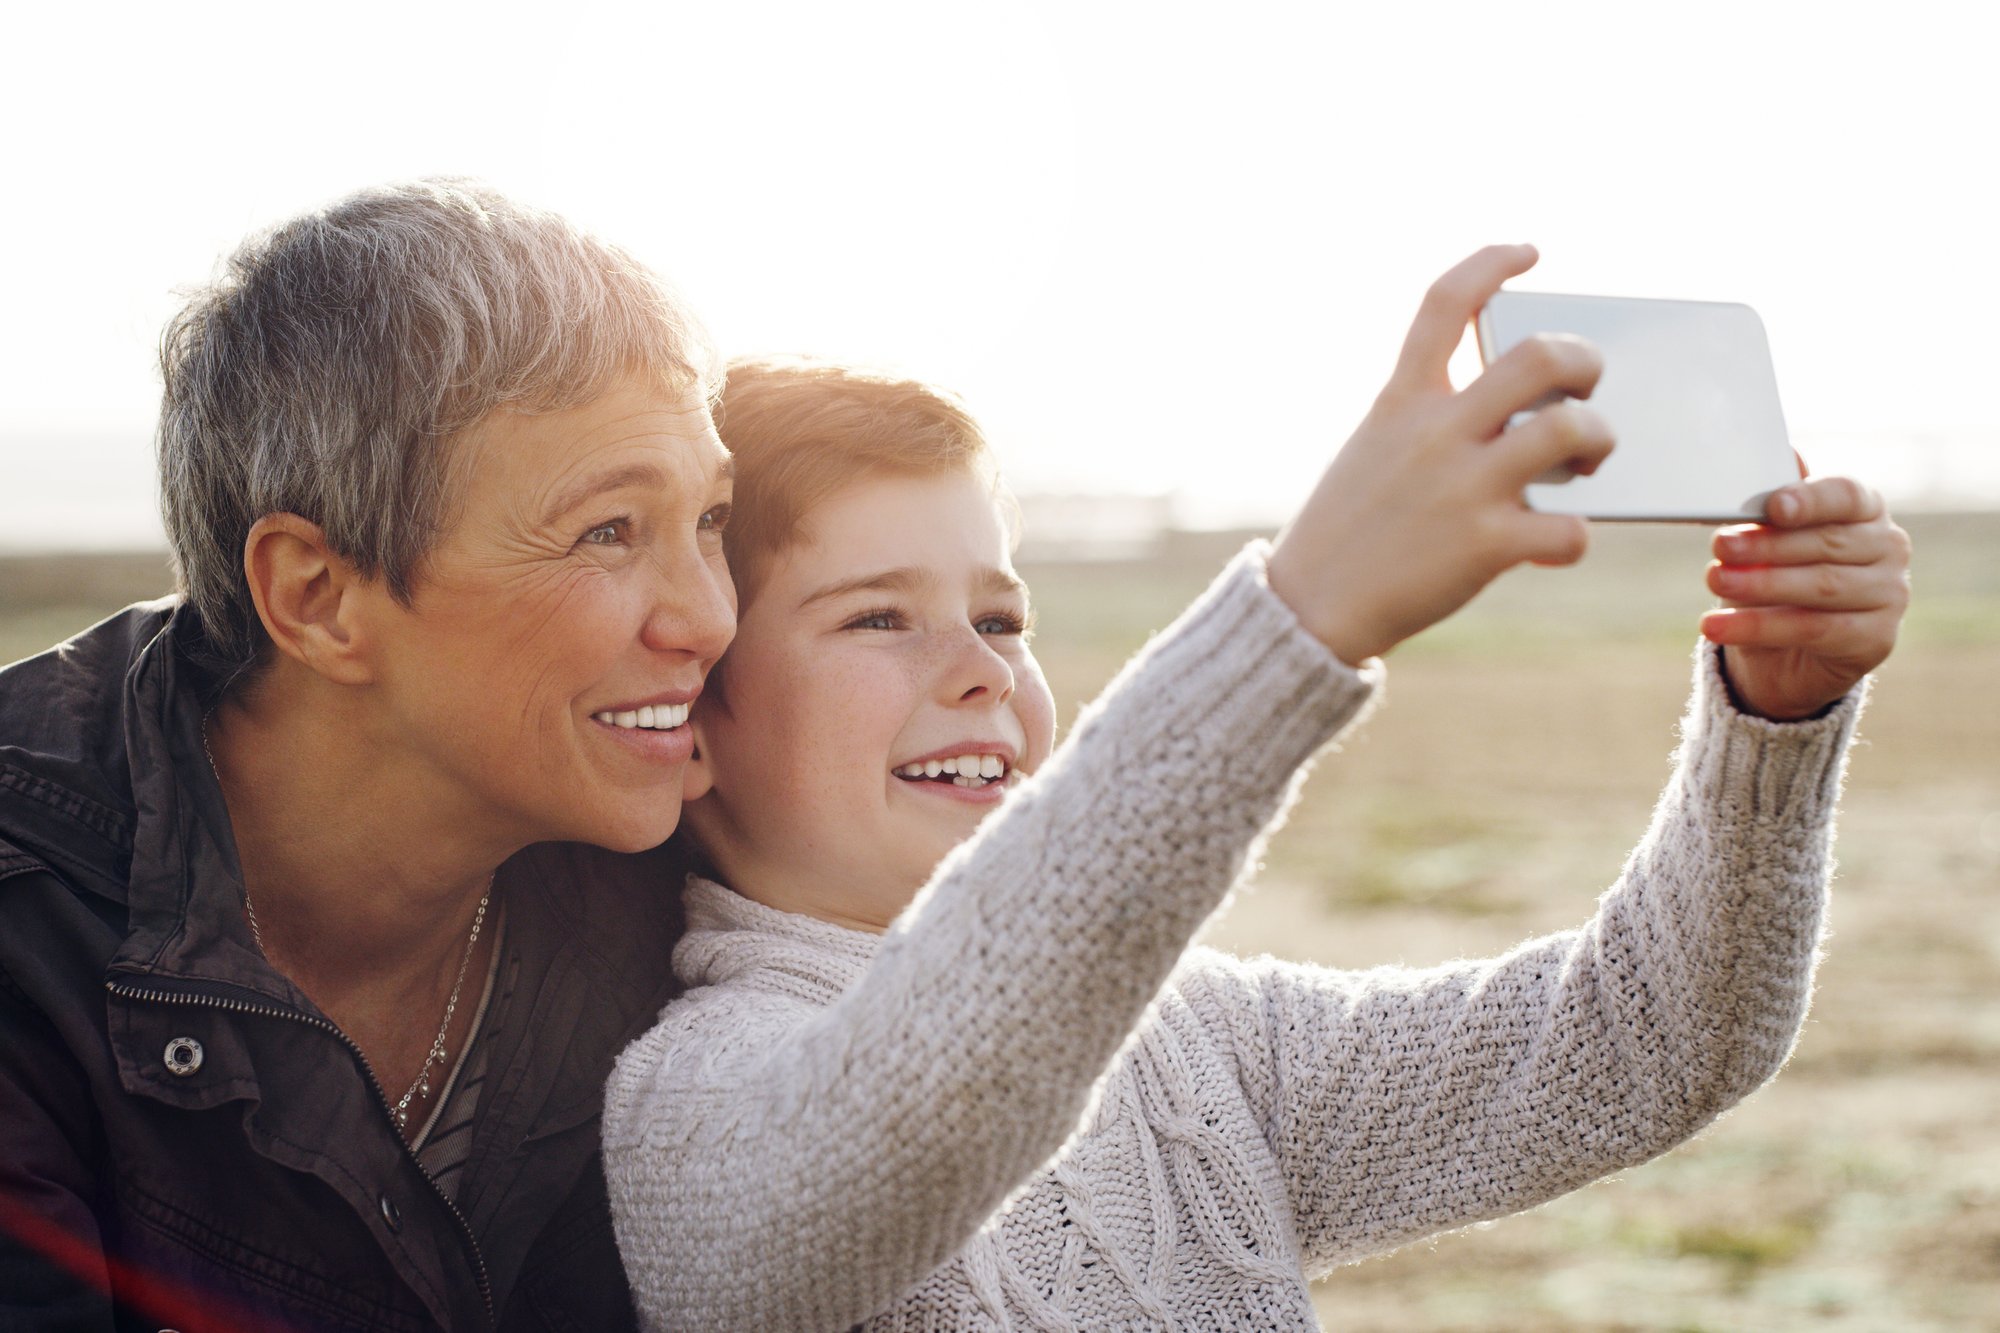 pose-camera-grandma-shot-adorable-little-boy-taking-selfie-with-his-grandmother-outdoors